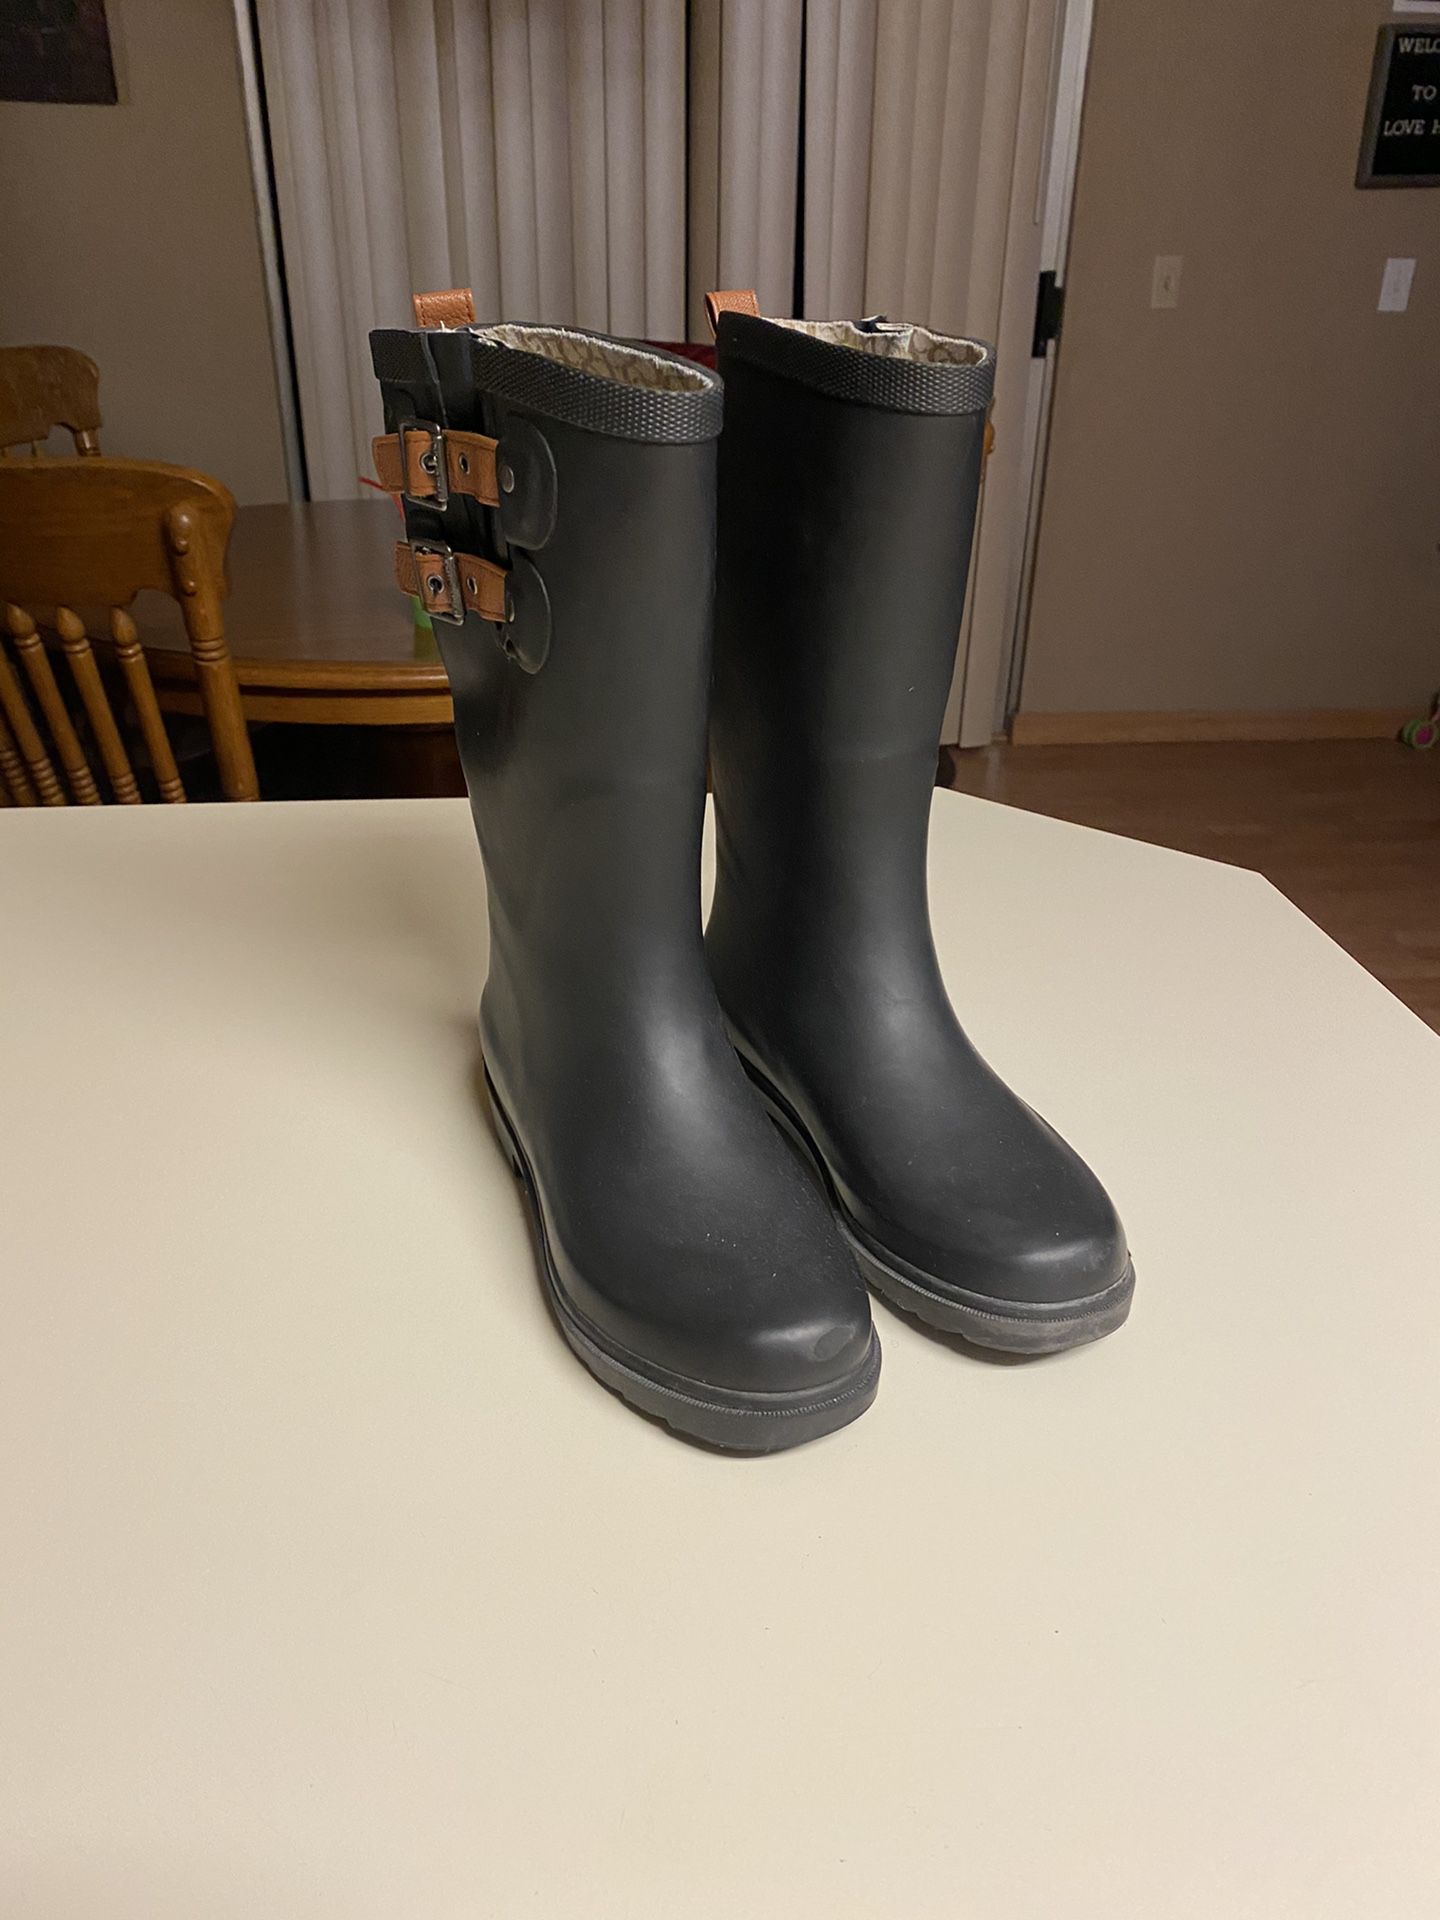 Top Solid Rain Boots Size 5